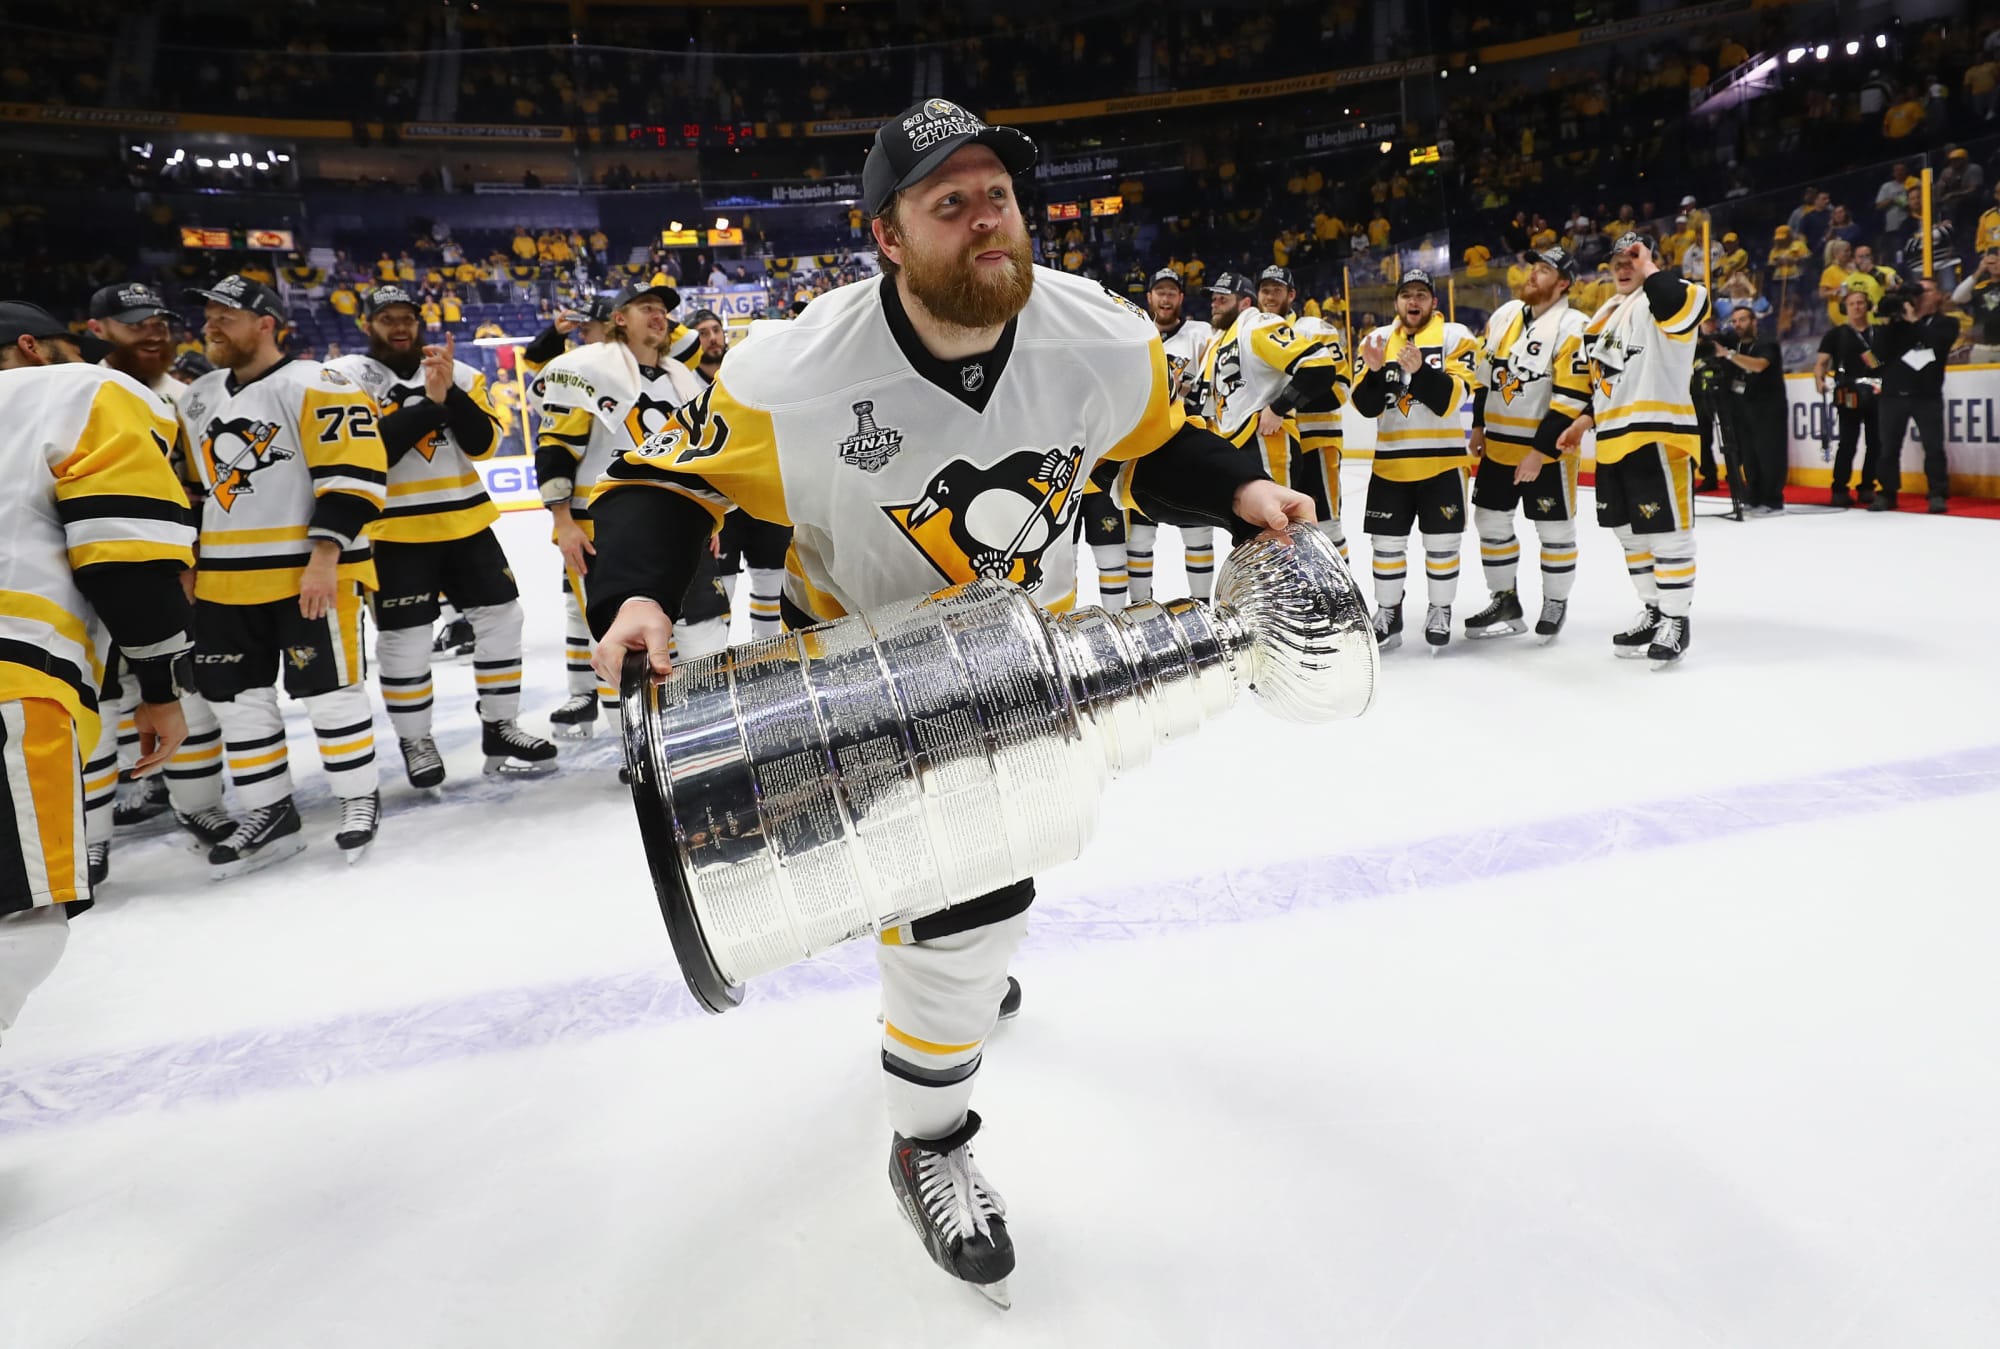 Kessel Comeback: Phil Kessel returns to Pittsburgh with 1st-place